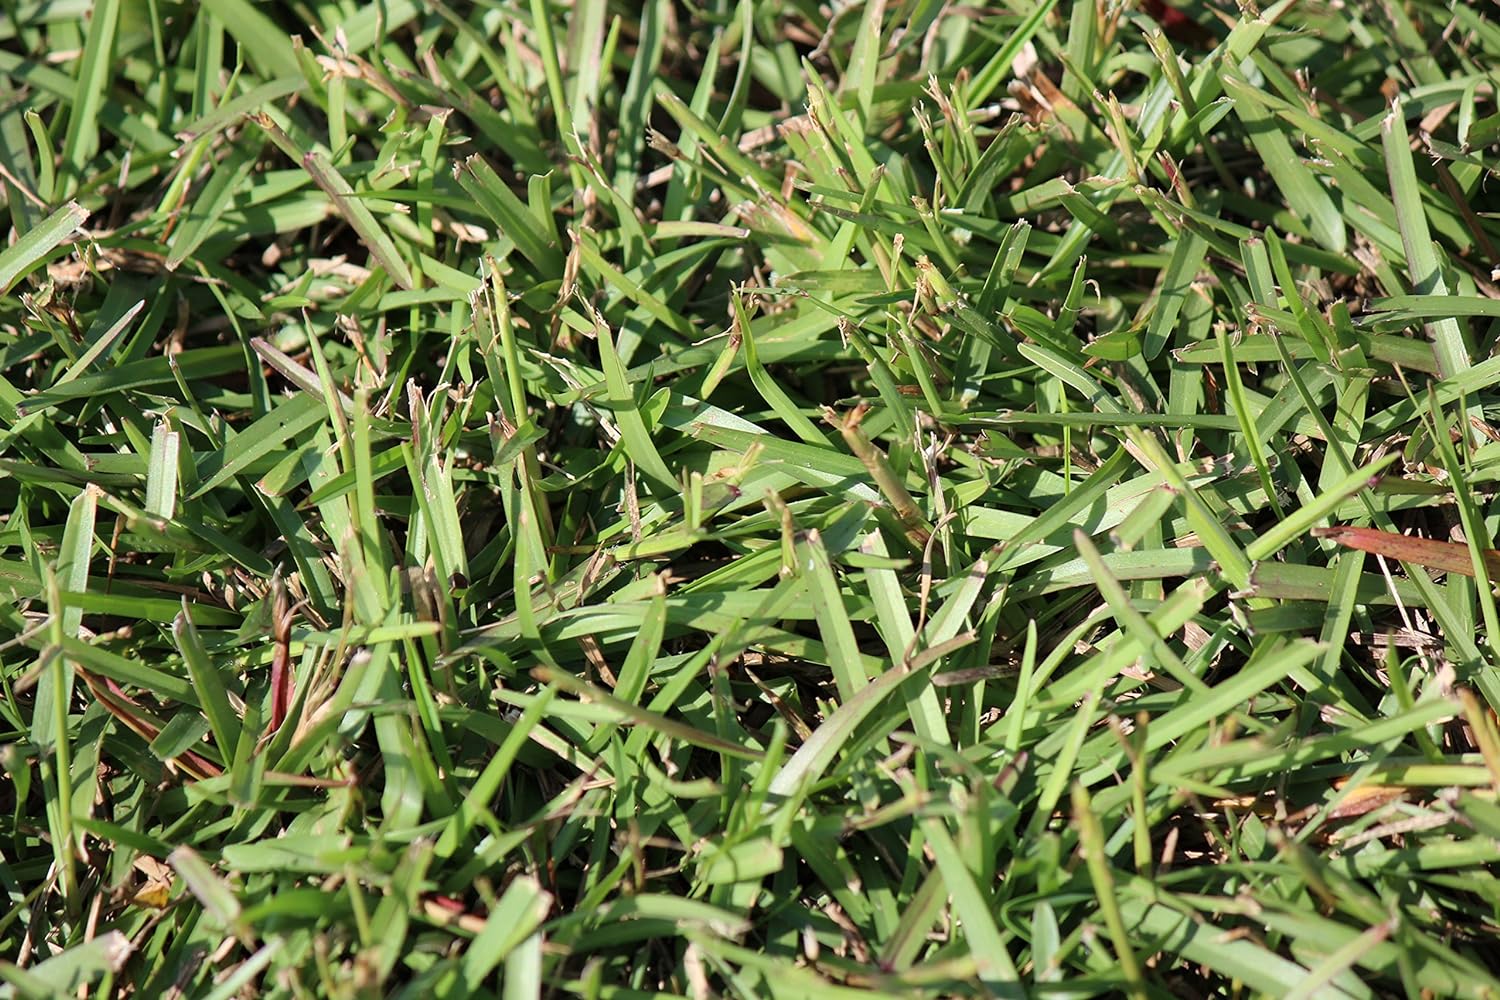 Centipede Grass Seed for a Beautiful and Low-Maintenance Lawn Review